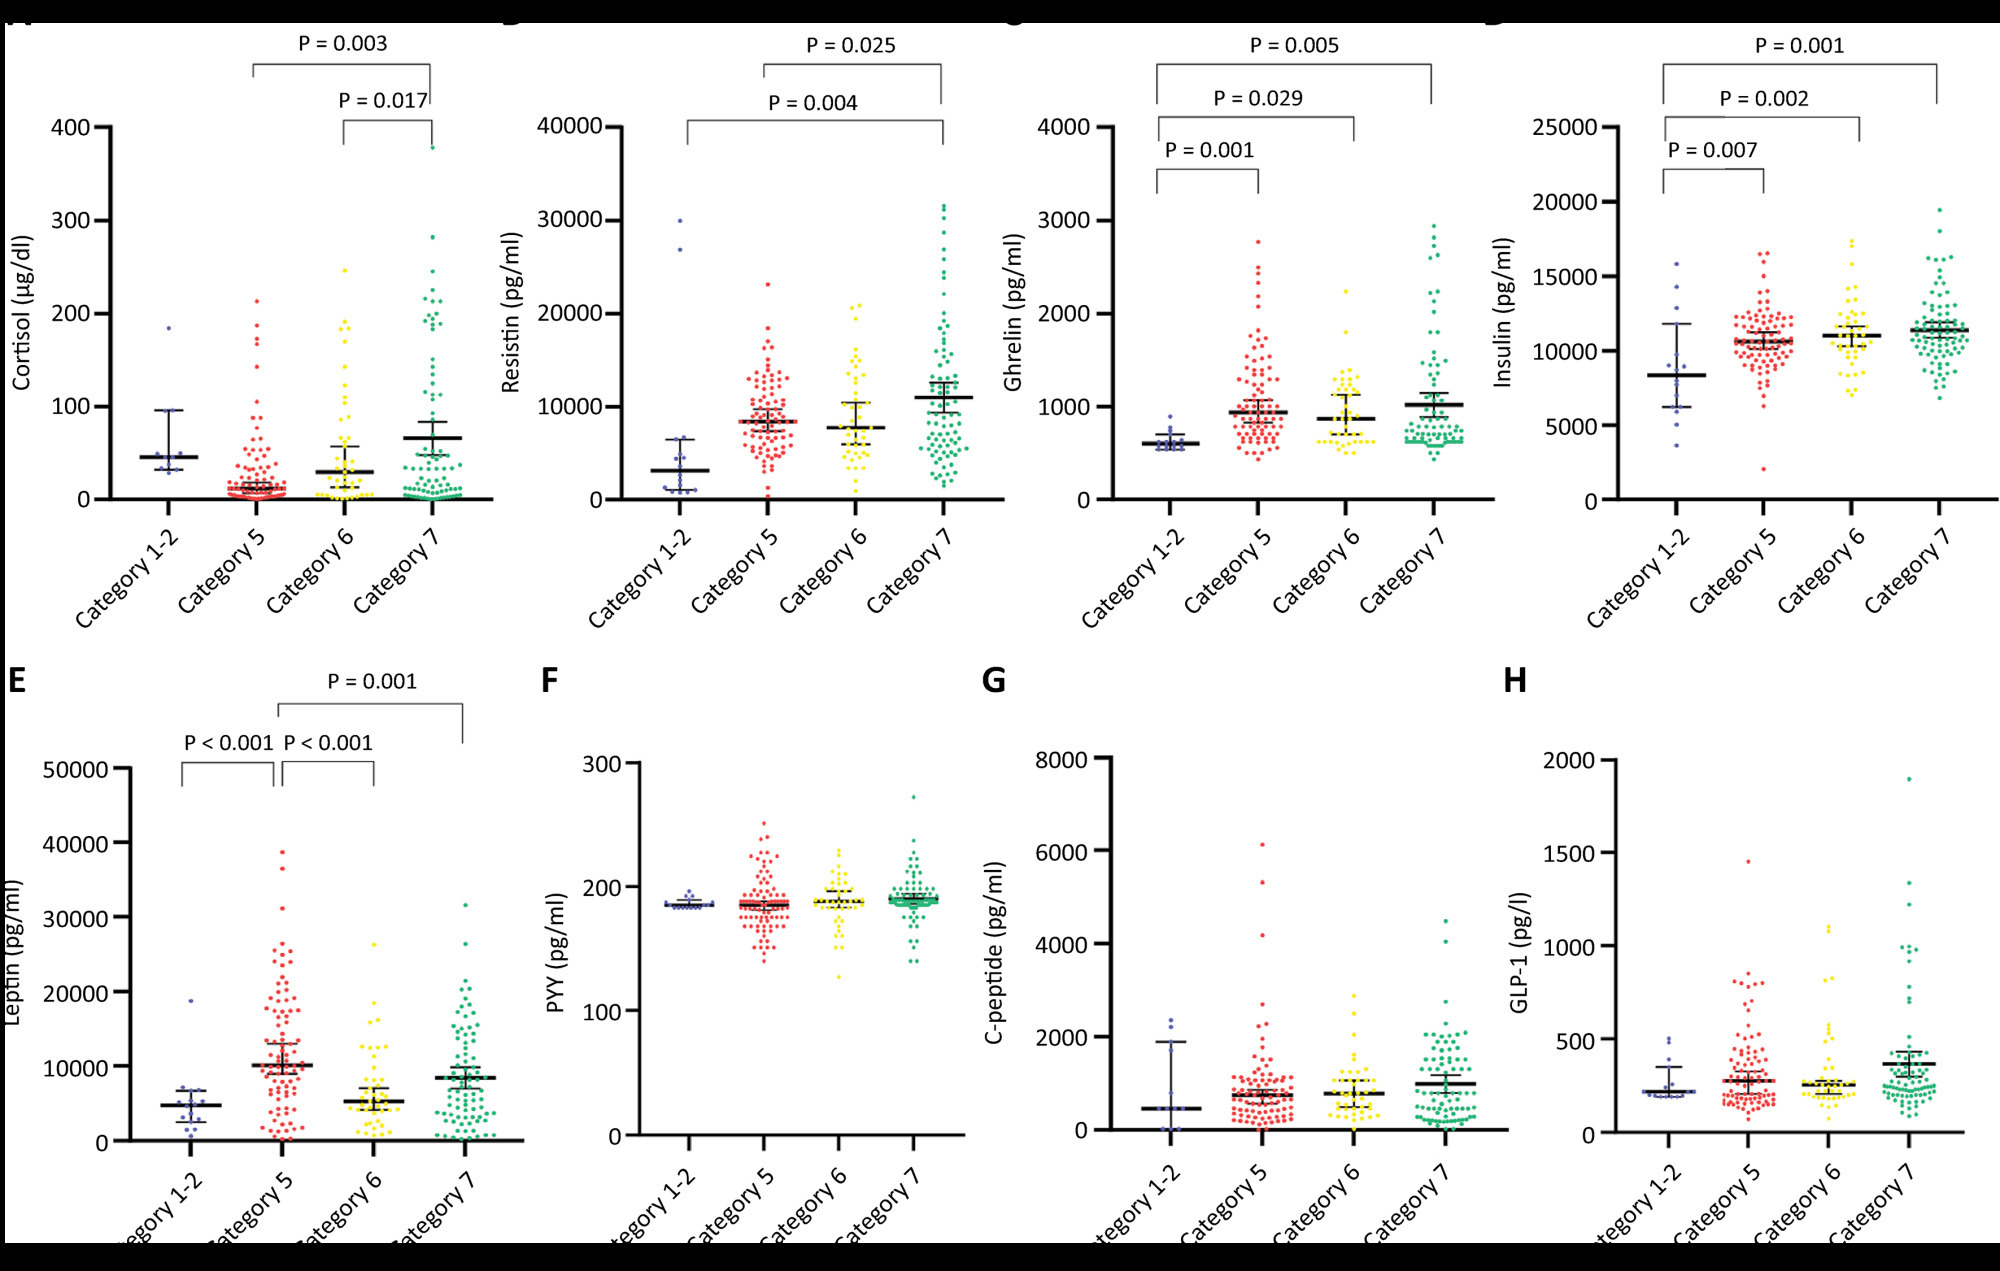 Identification of distinct phenotypes and improving prognosis using metabolic biomarkers in COVID-19 patients